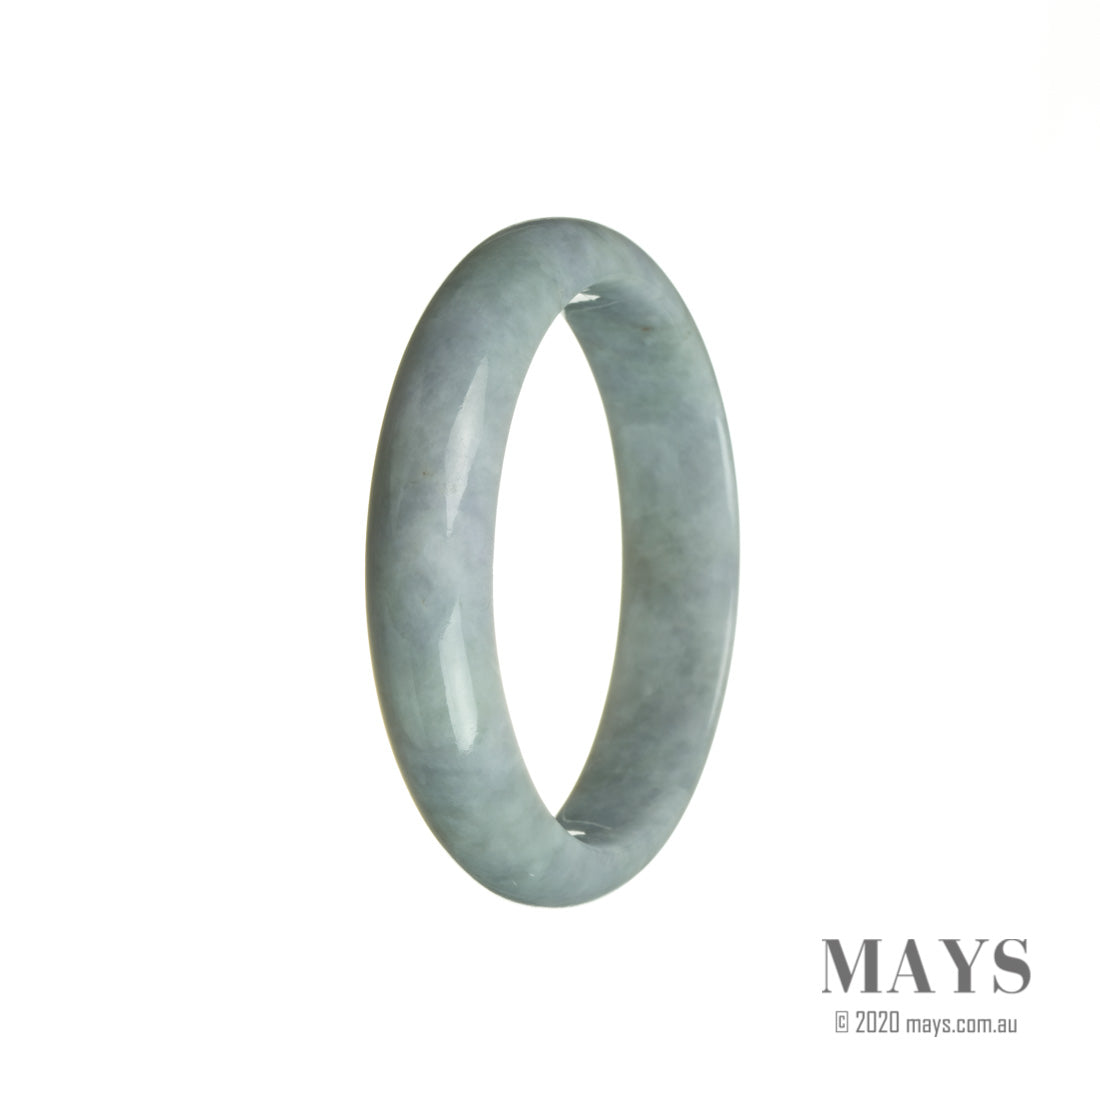 A lavender-colored bracelet made with certified natural lavender and adorned with a 57mm half moon-shaped green jade stone. Created by MAYS™.